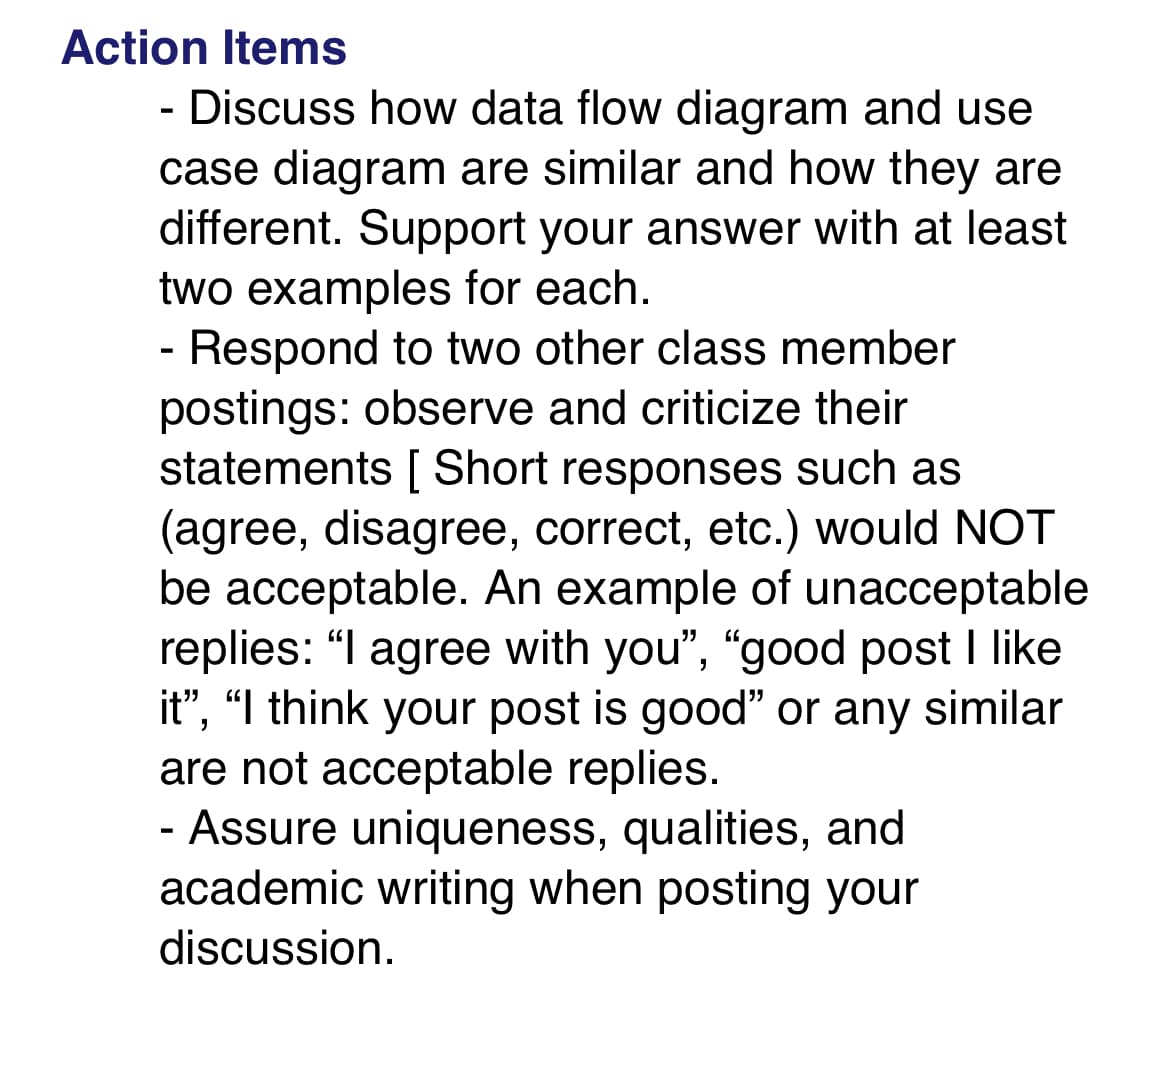 Action Items
- Discuss how data flow diagram and use
case diagram are similar and how they are
different. Support your answer with at least
two examples for each.
Respond to two other class member
postings: observe and criticize their
statements [Short responses such as
(agree, disagree, correct, etc.) would NOT
be acceptable. An example of unacceptable
replies: "I agree with you", "good post I like
it", "I think your post is good" or any similar
are not acceptable replies.
- Assure uniqueness, qualities, and
academic writing when posting your
discussion.
-